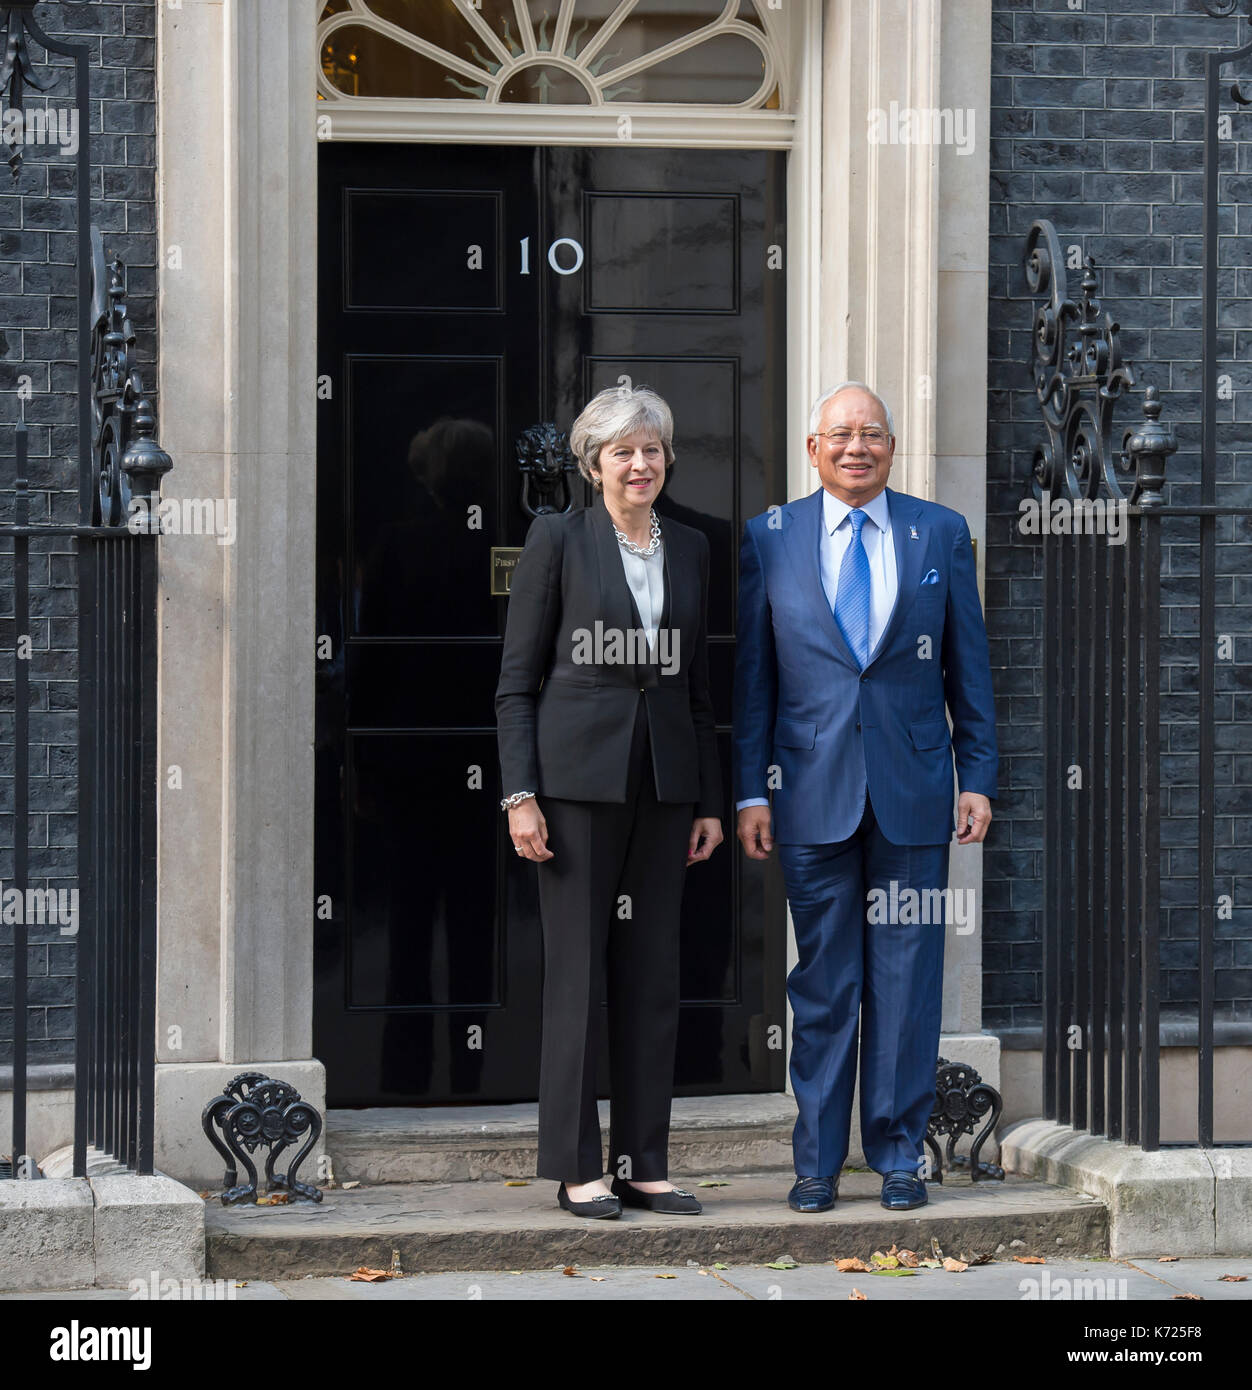 10 Downing Street, London UK. 14 September, 2017. The Prime Minister of Malaysia, Najib Razak, is welcomed to 10 Downing Street by British PM Theresa May. Credit: Malcolm Park/Alamy Live News. Stock Photo